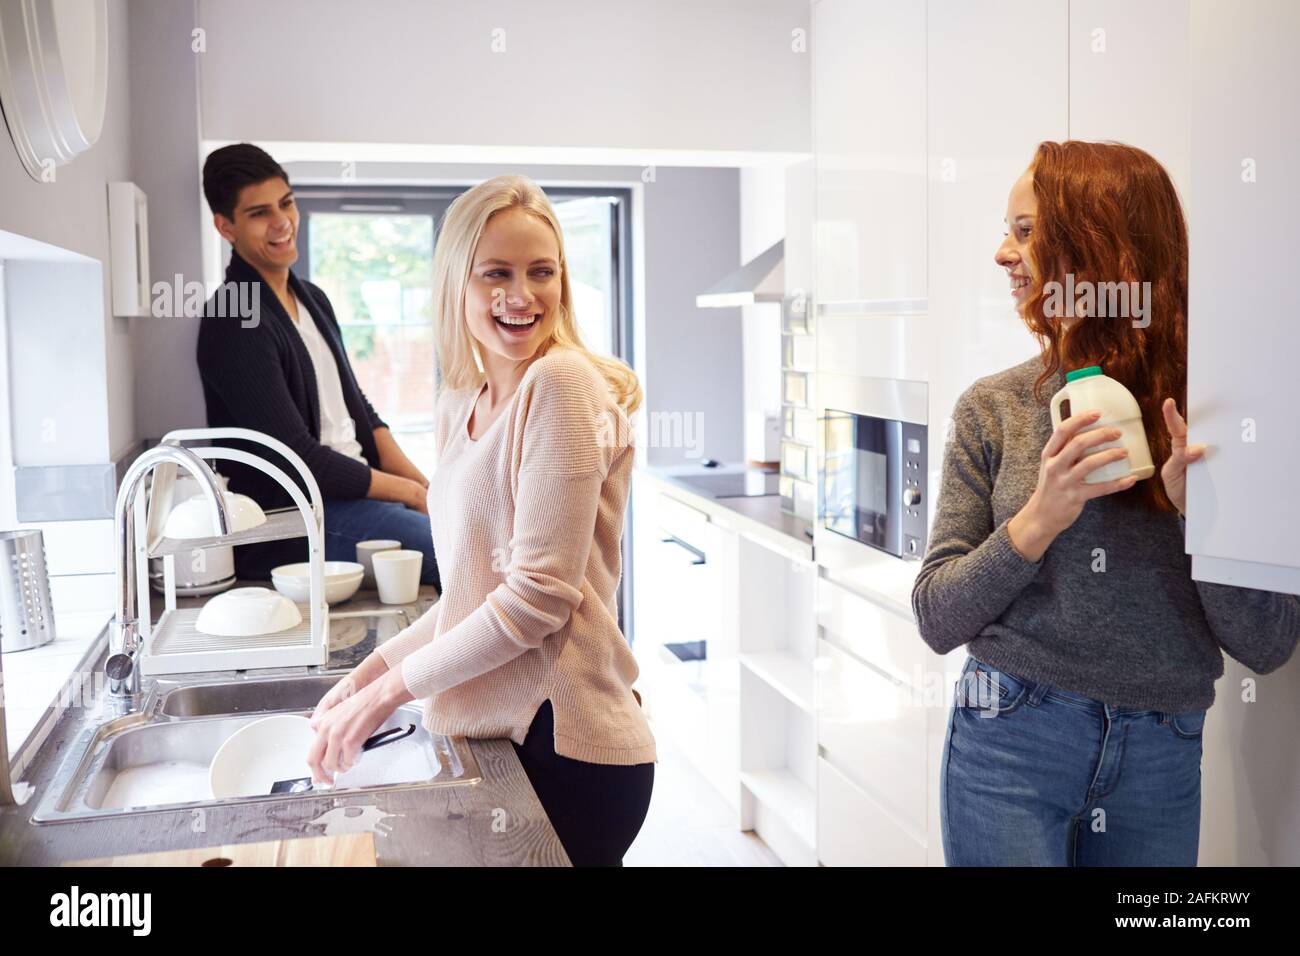 Group Of College Student Friends In Shared House Kitchen Washing Up And Hanging Out Together Stock Photo